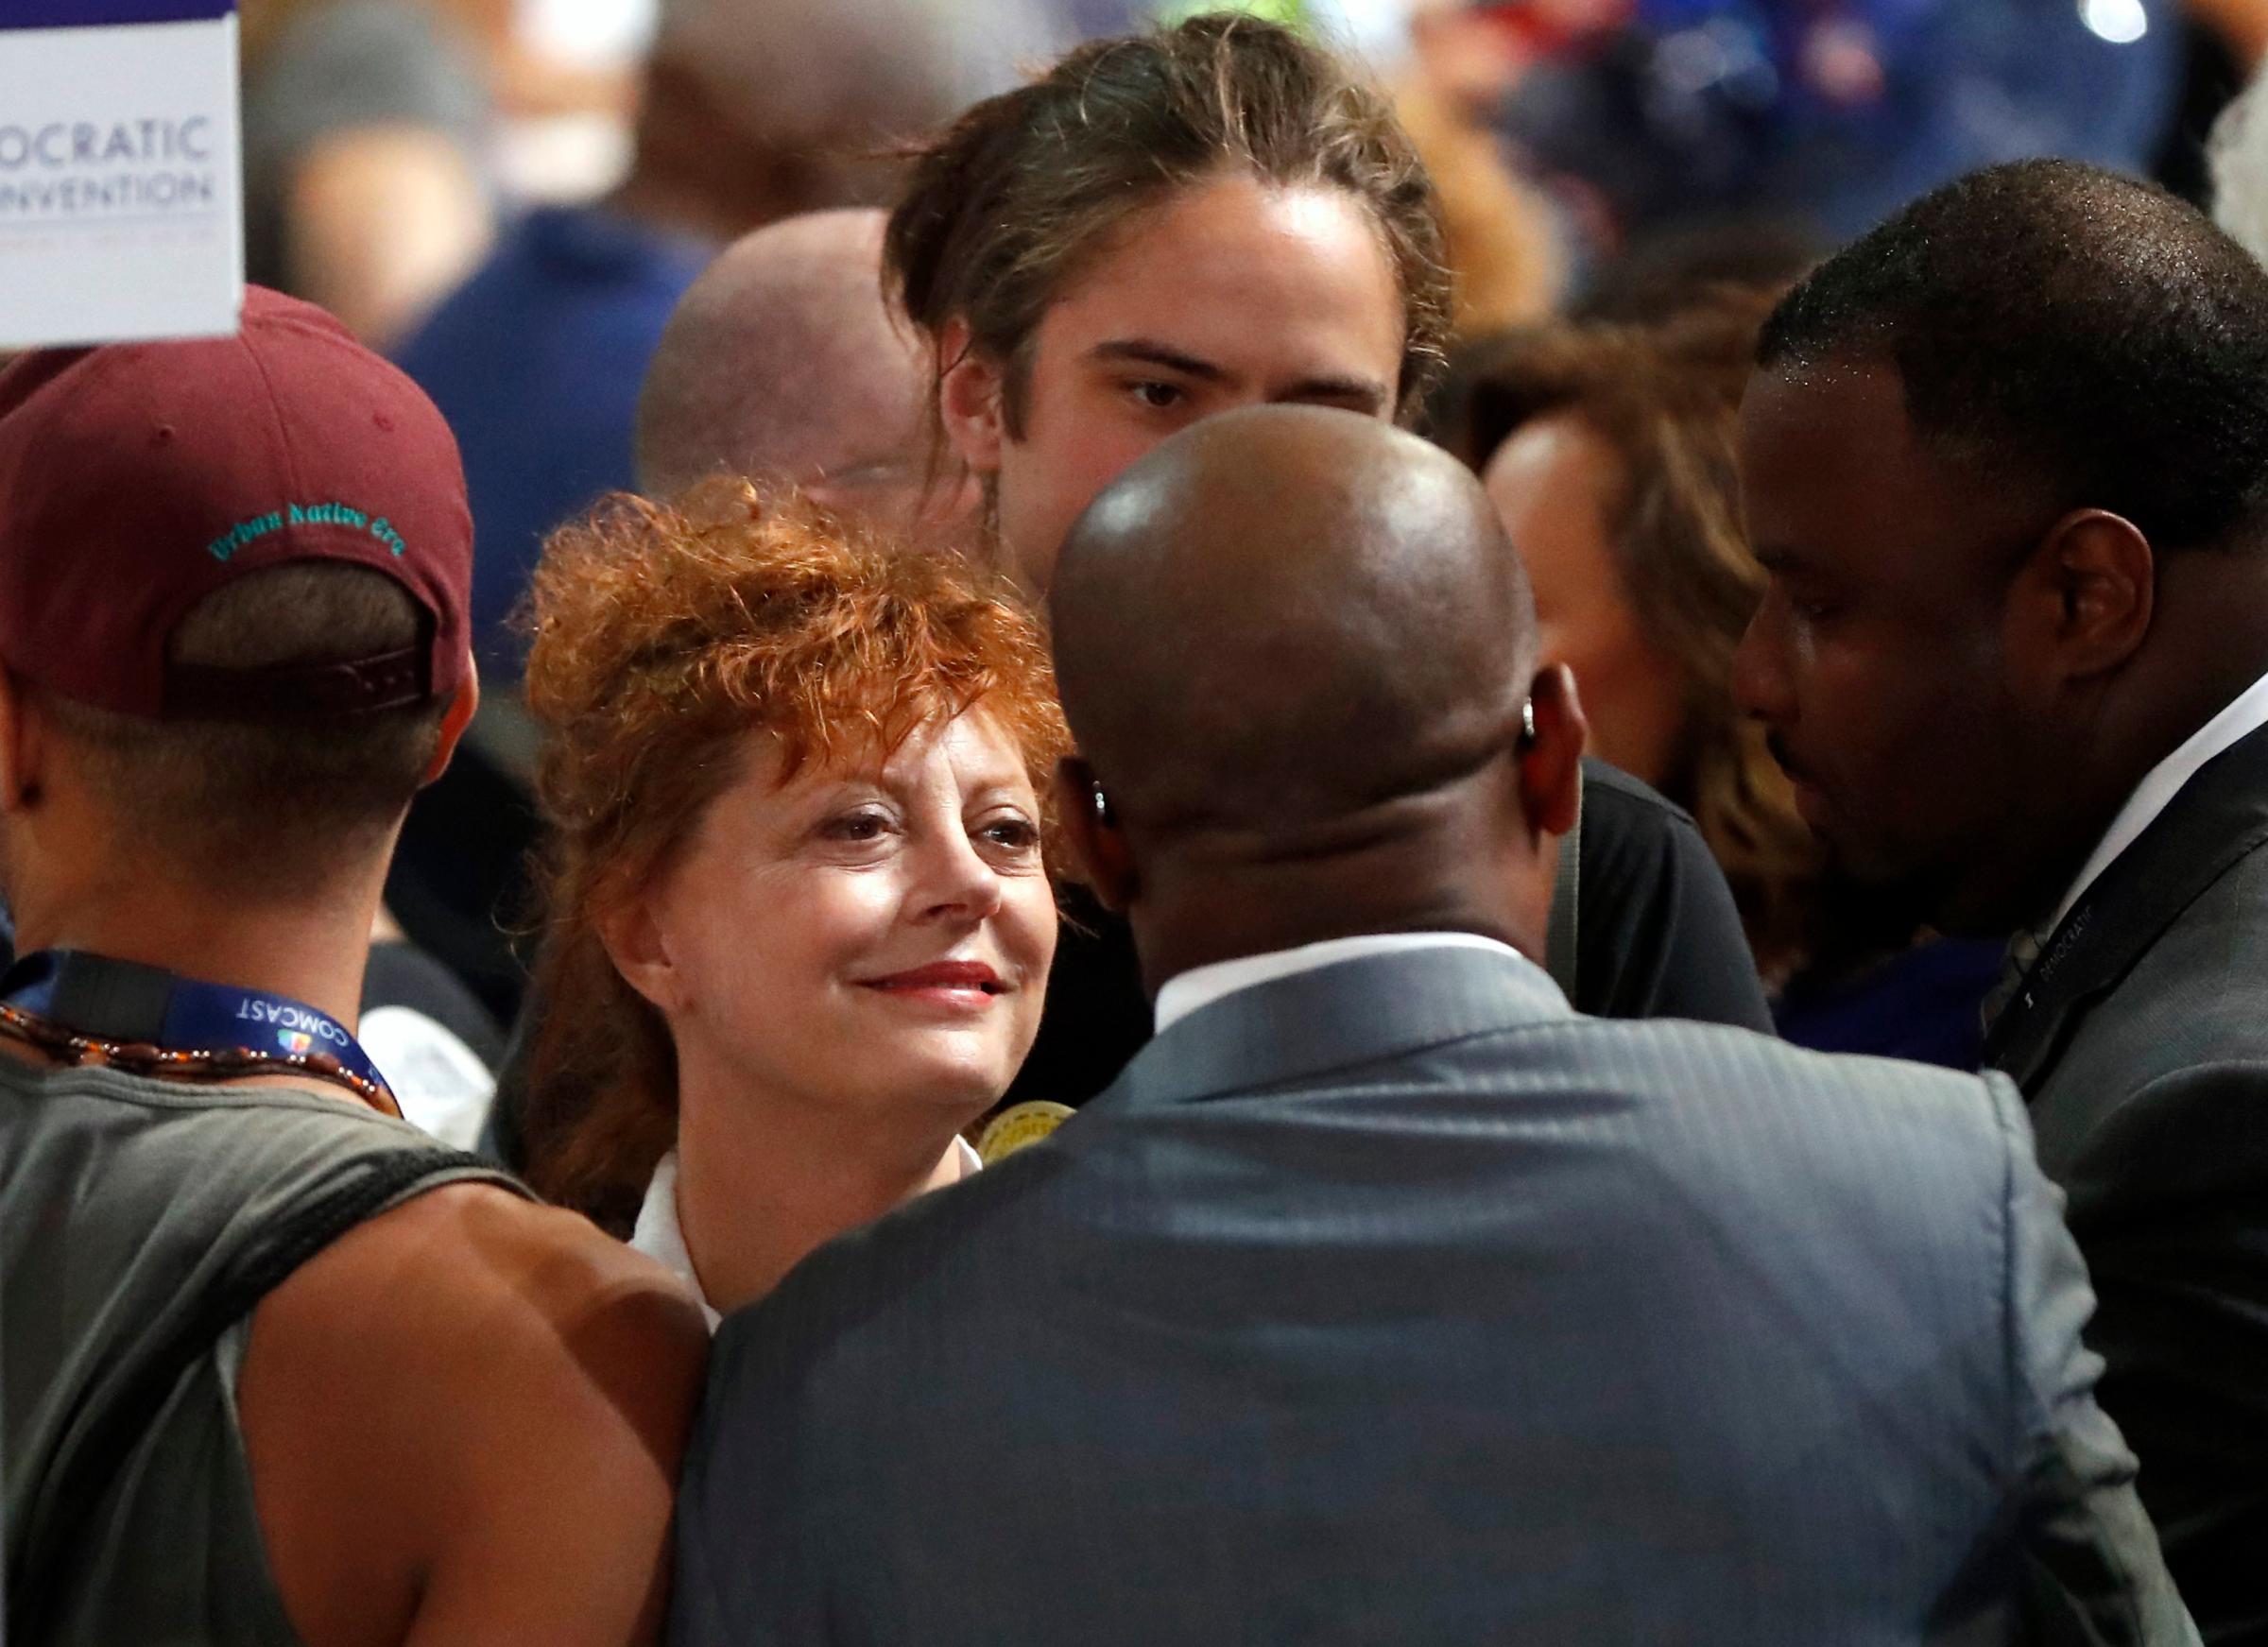 Actress Susan Sarandon walks on the convention floor during the first day of the Democratic National Convention in Philadelphia on July 25, 2016.